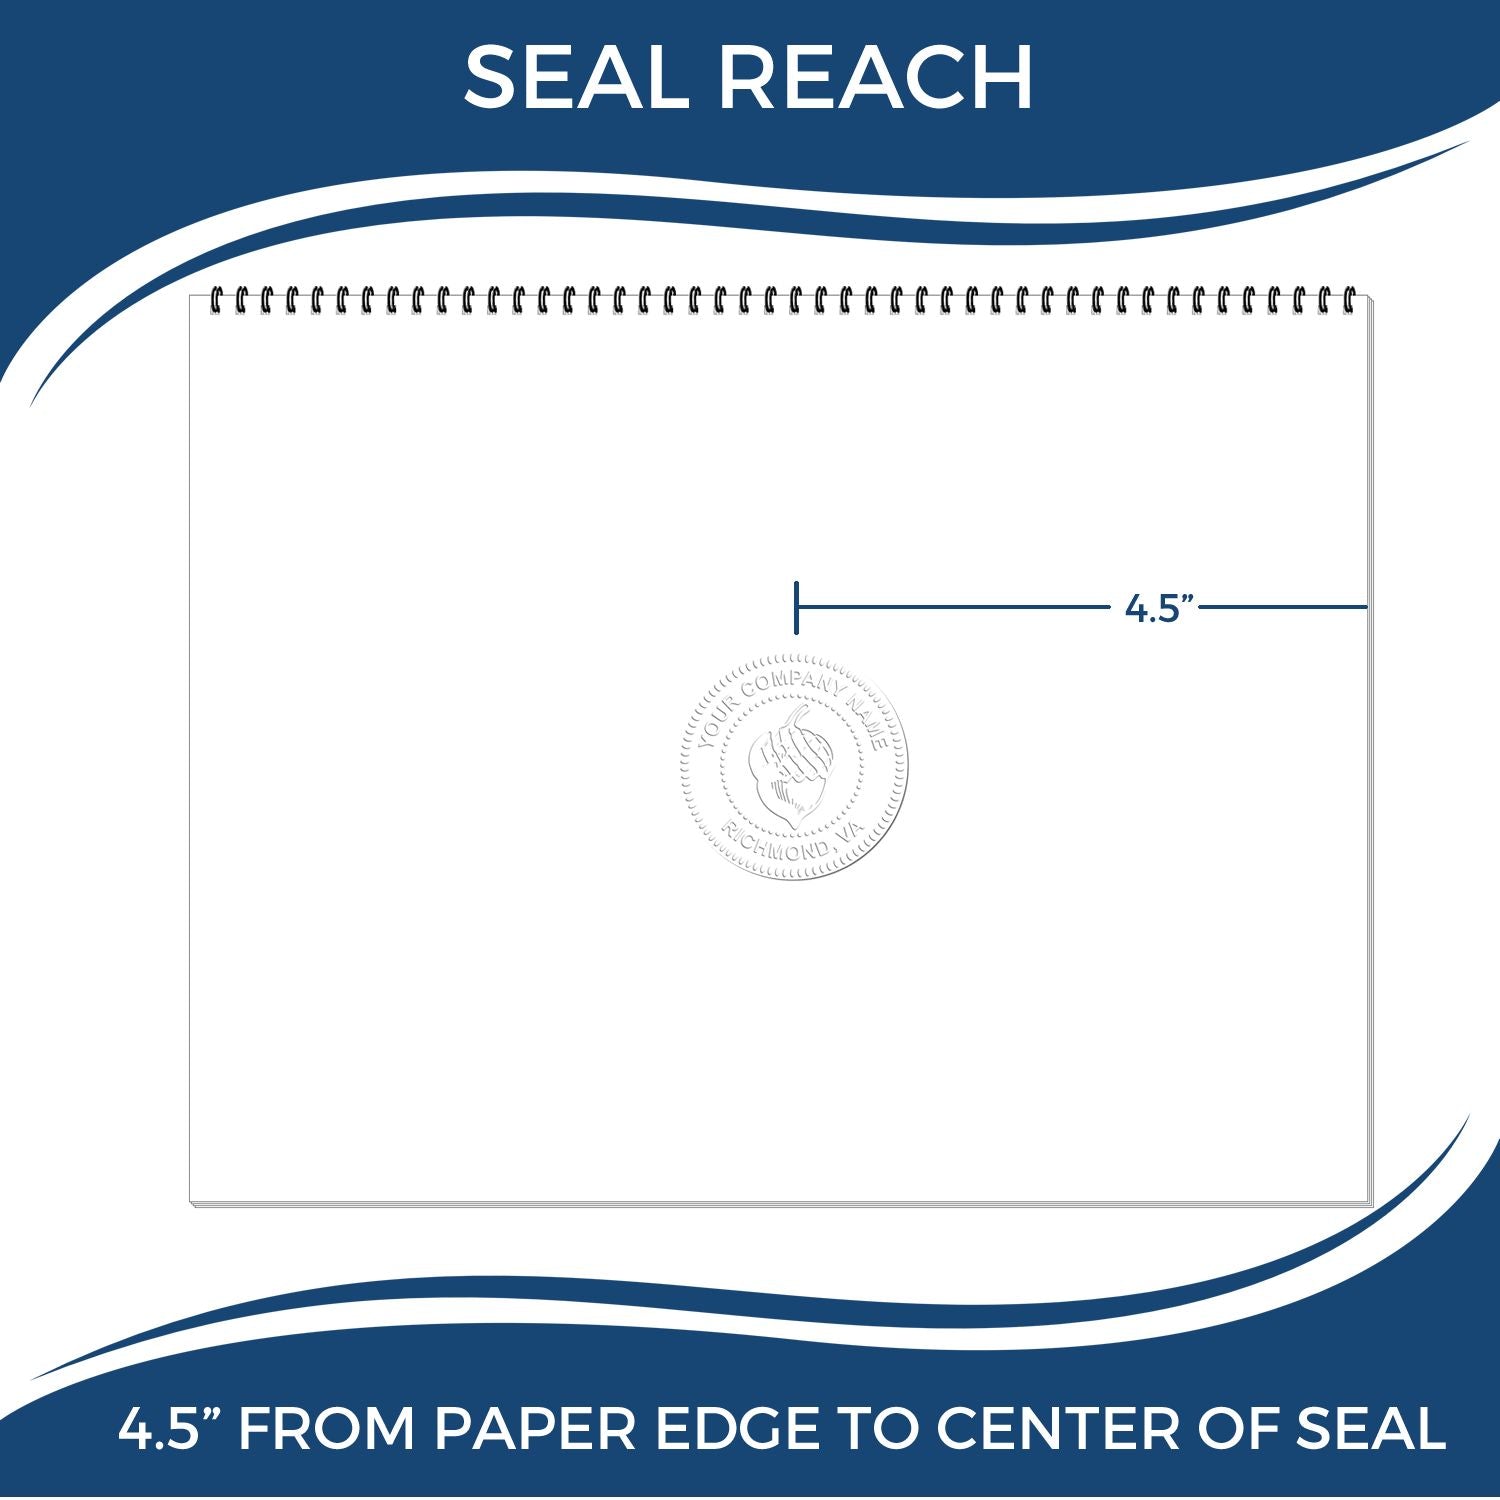 An infographic showing the seal reach which is represented by a ruler and a miniature seal image of the Extended Long Reach Iowa Surveyor Embosser